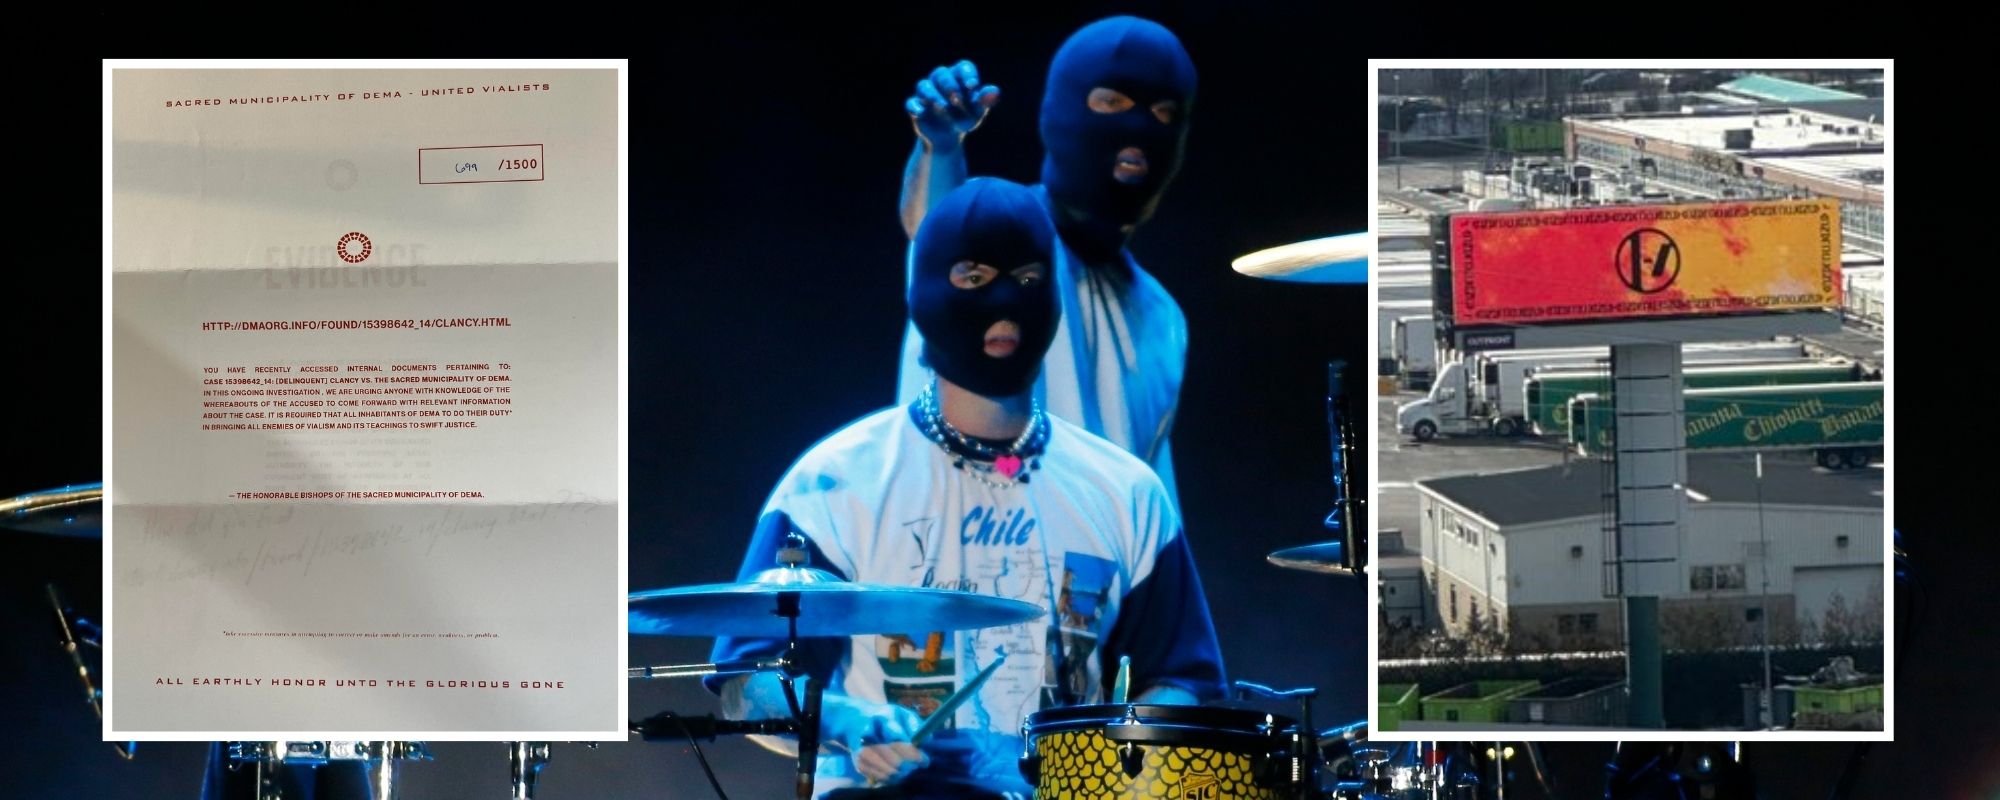 Twenty One Pilots Fans Have Allegedly Received Strange Letters Hinting at a New Era for the Band